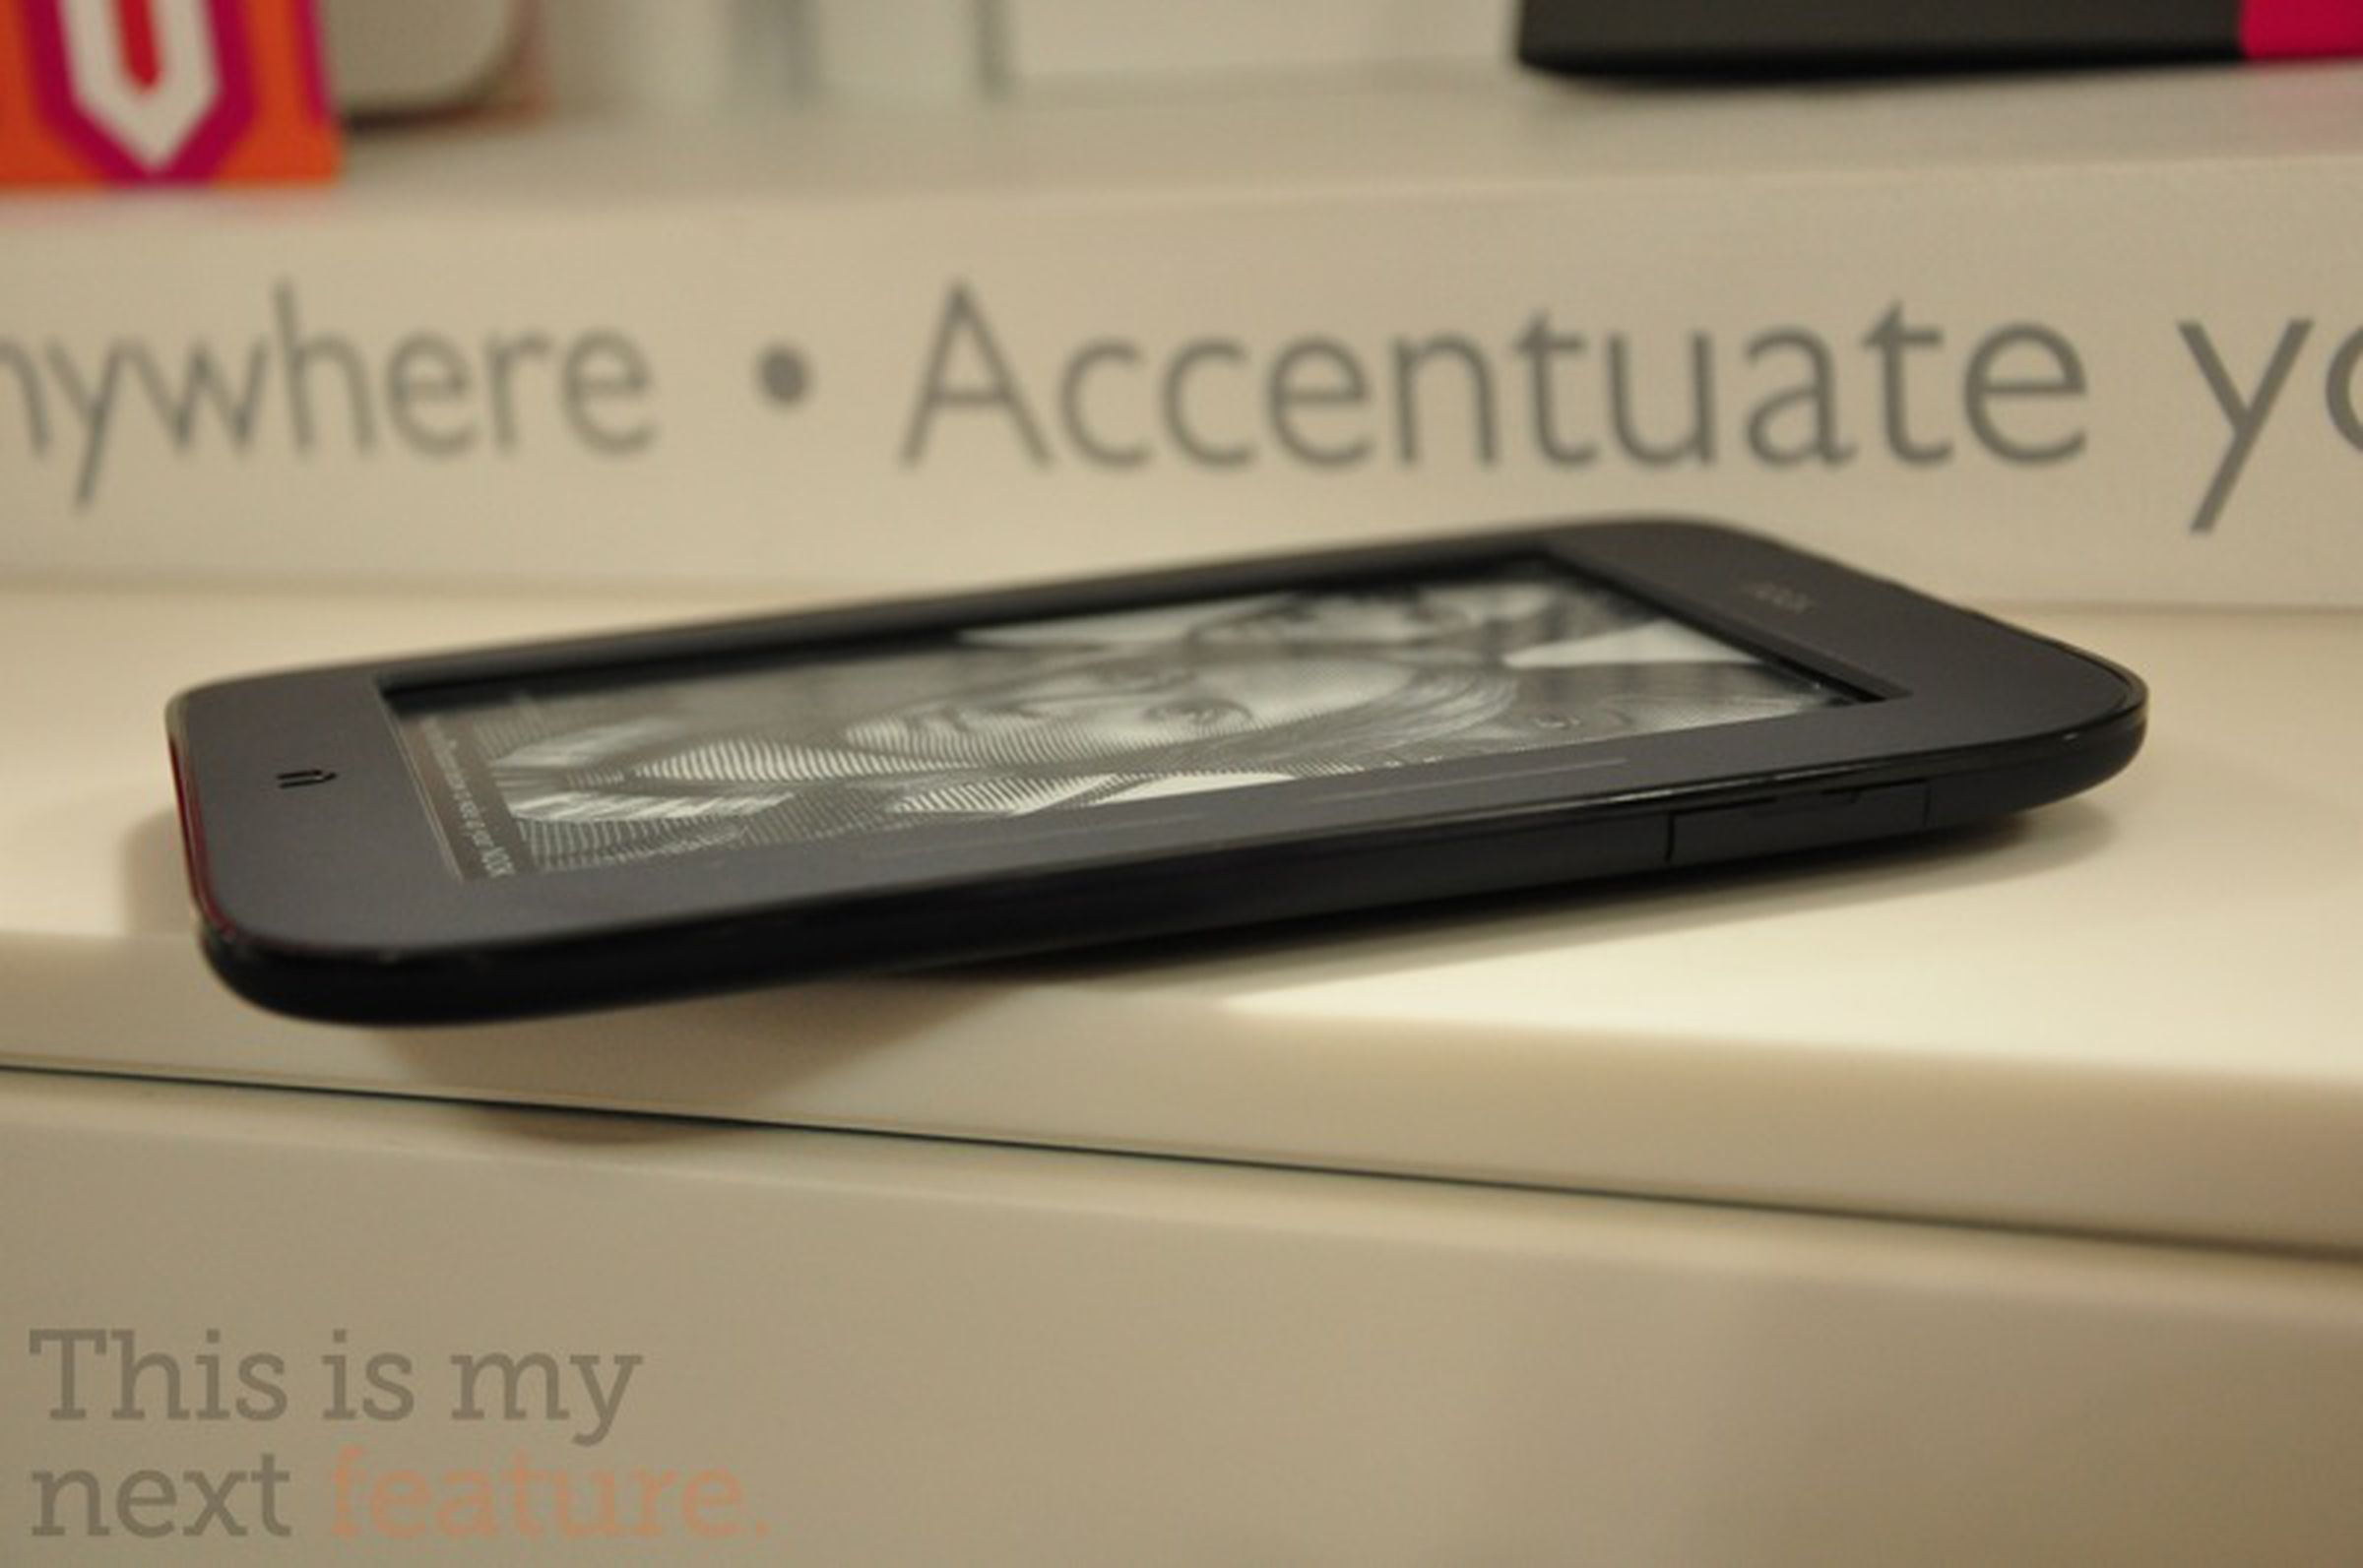 Barnes & Noble new Nook hands-on (updated with video!)